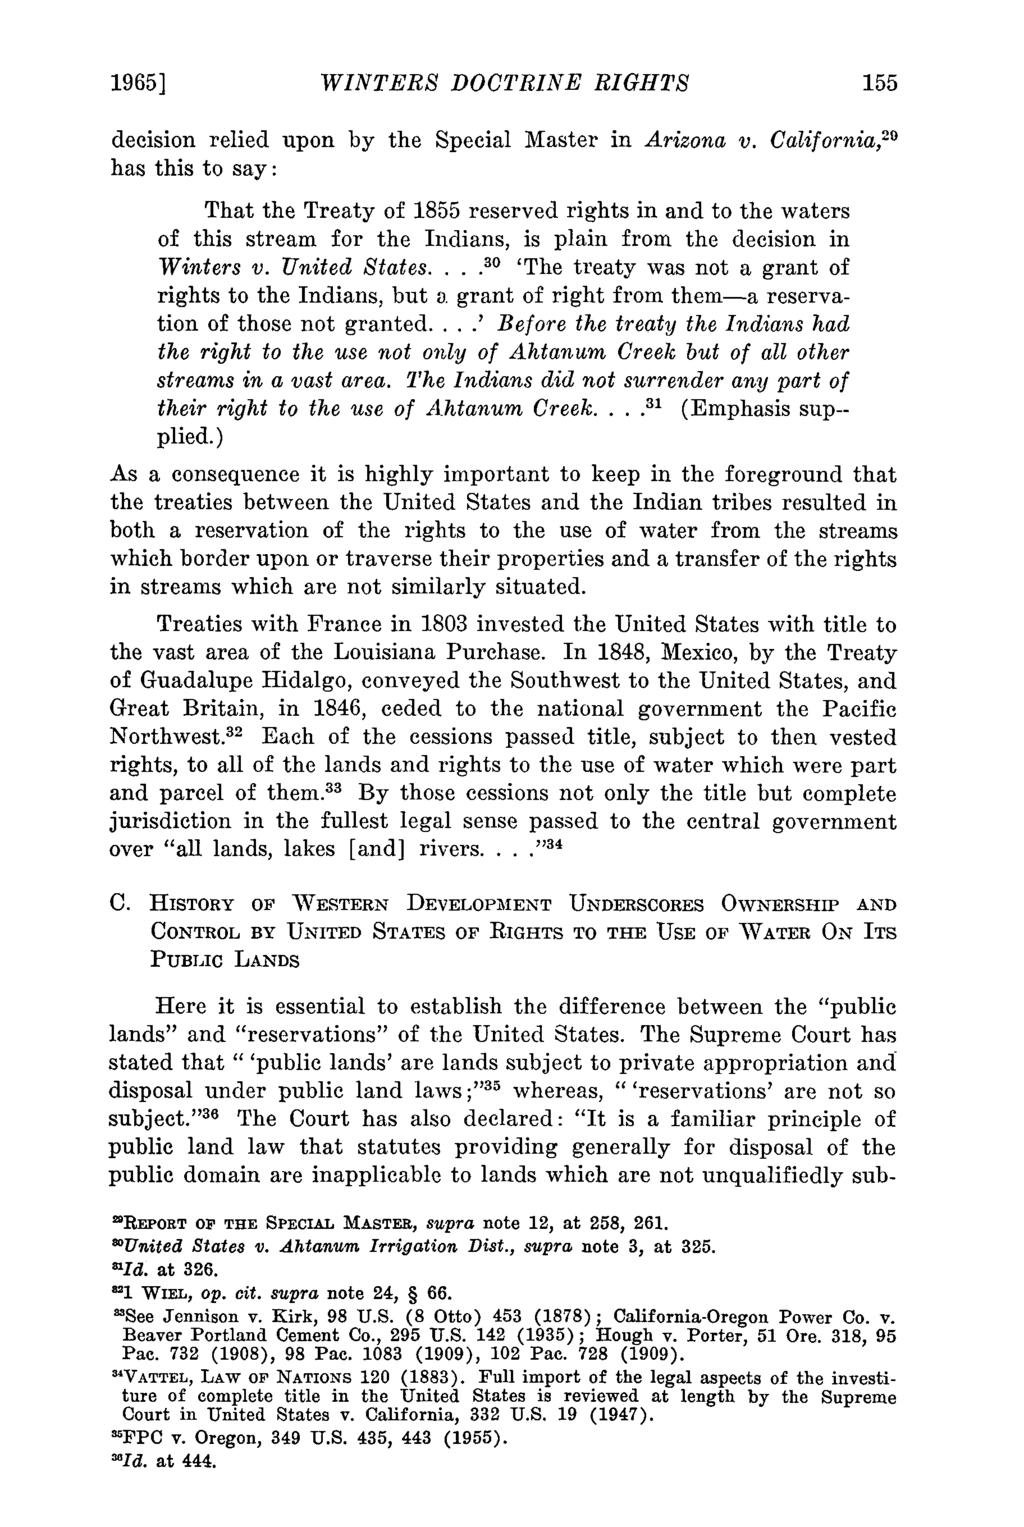 Winters Doctrine Rights Keystone of National Programs for Western Land and Water Conservation and Uti 1965] WINTERS DOCTRINE RIGHTS decision relied upon by the Special Master in Arizona v.